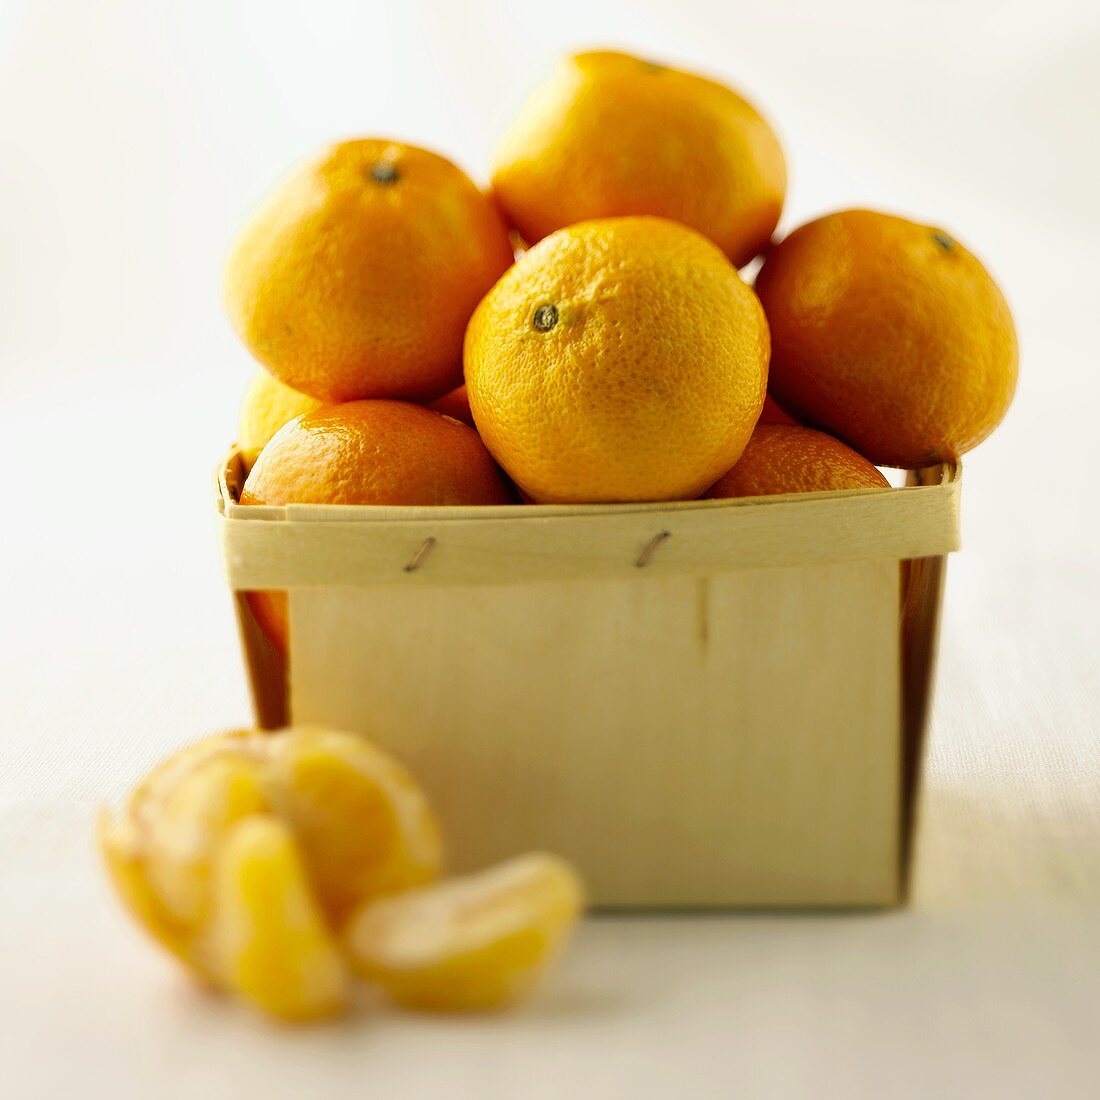 A Box of Clementines, One Peeled